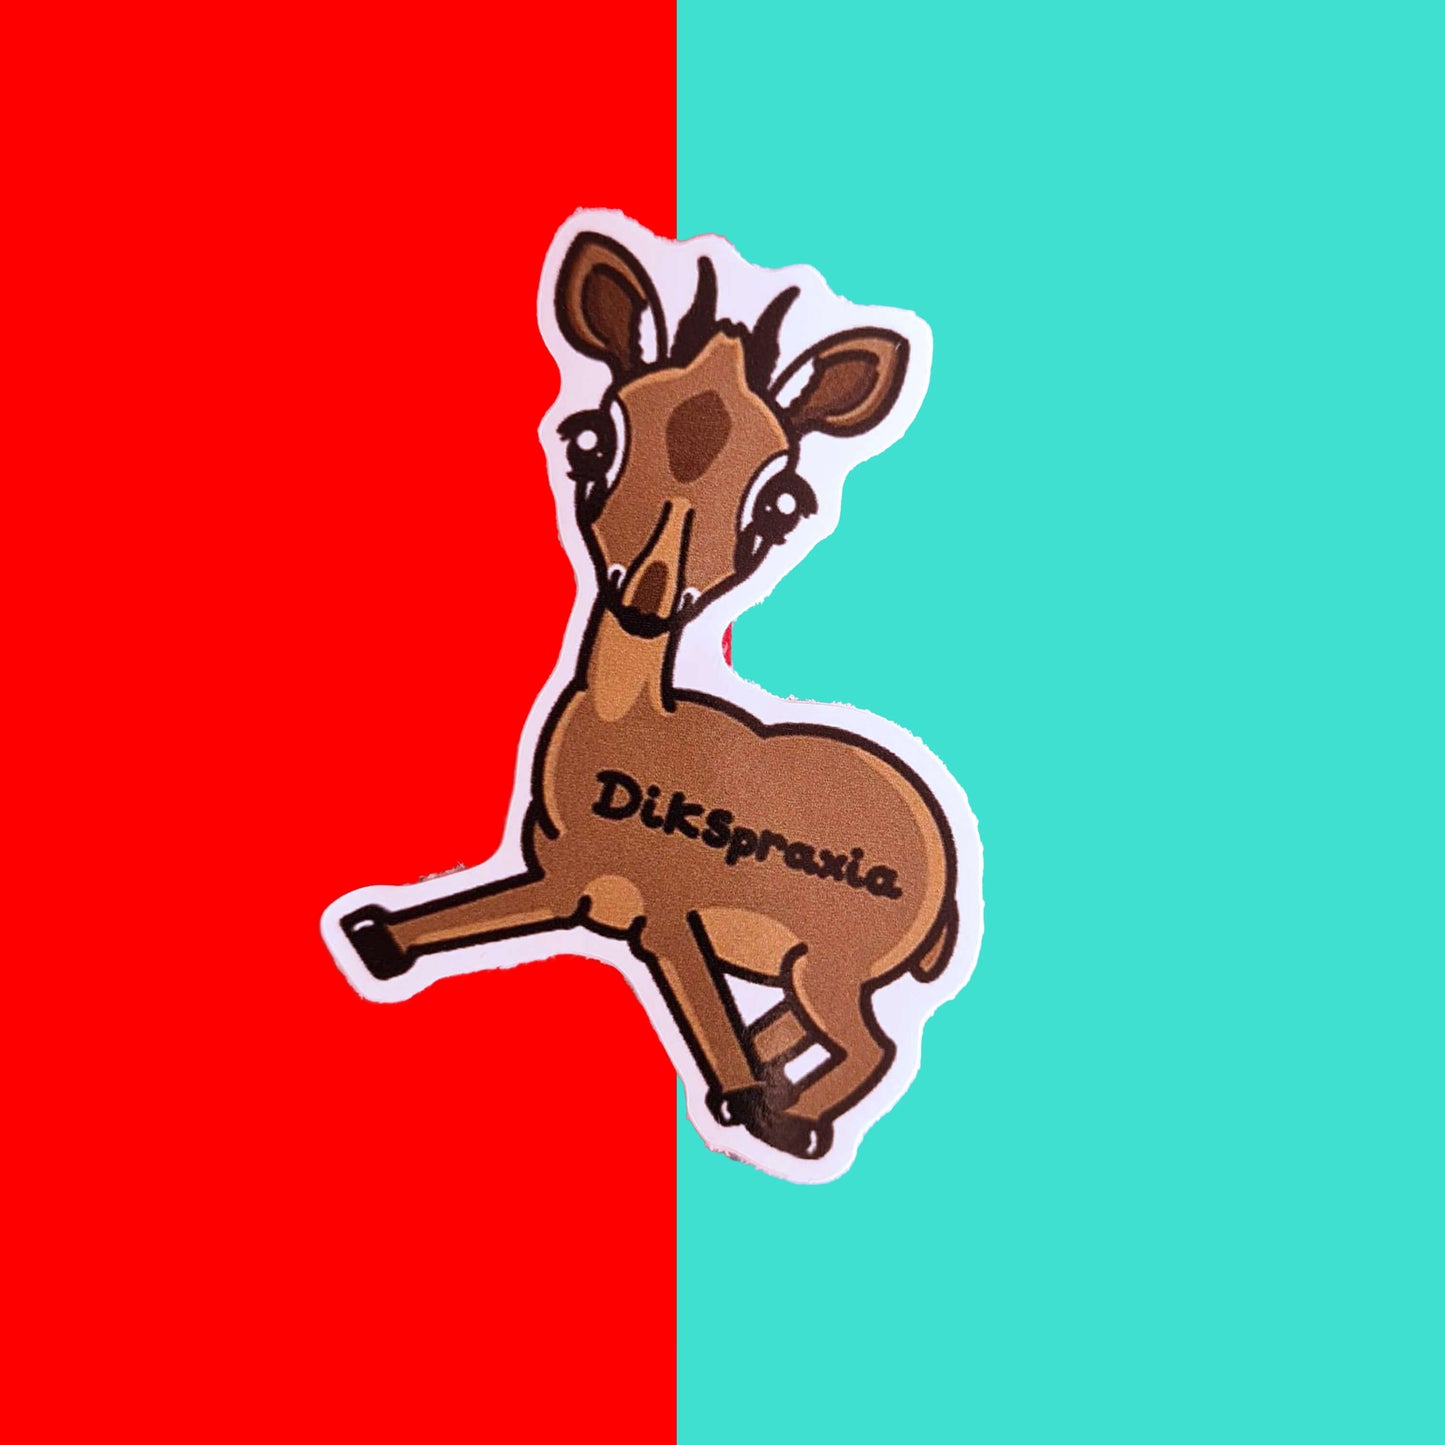 The Dikspraxia Sticker - Dyspraxia on a red and blue background. The brown dik dik antelope shaped sticker has its two front legs splayed chaotically with black text reading 'dikspraxia' across its middle. The design is raising awareness for dyspraxia and neurodivergence.